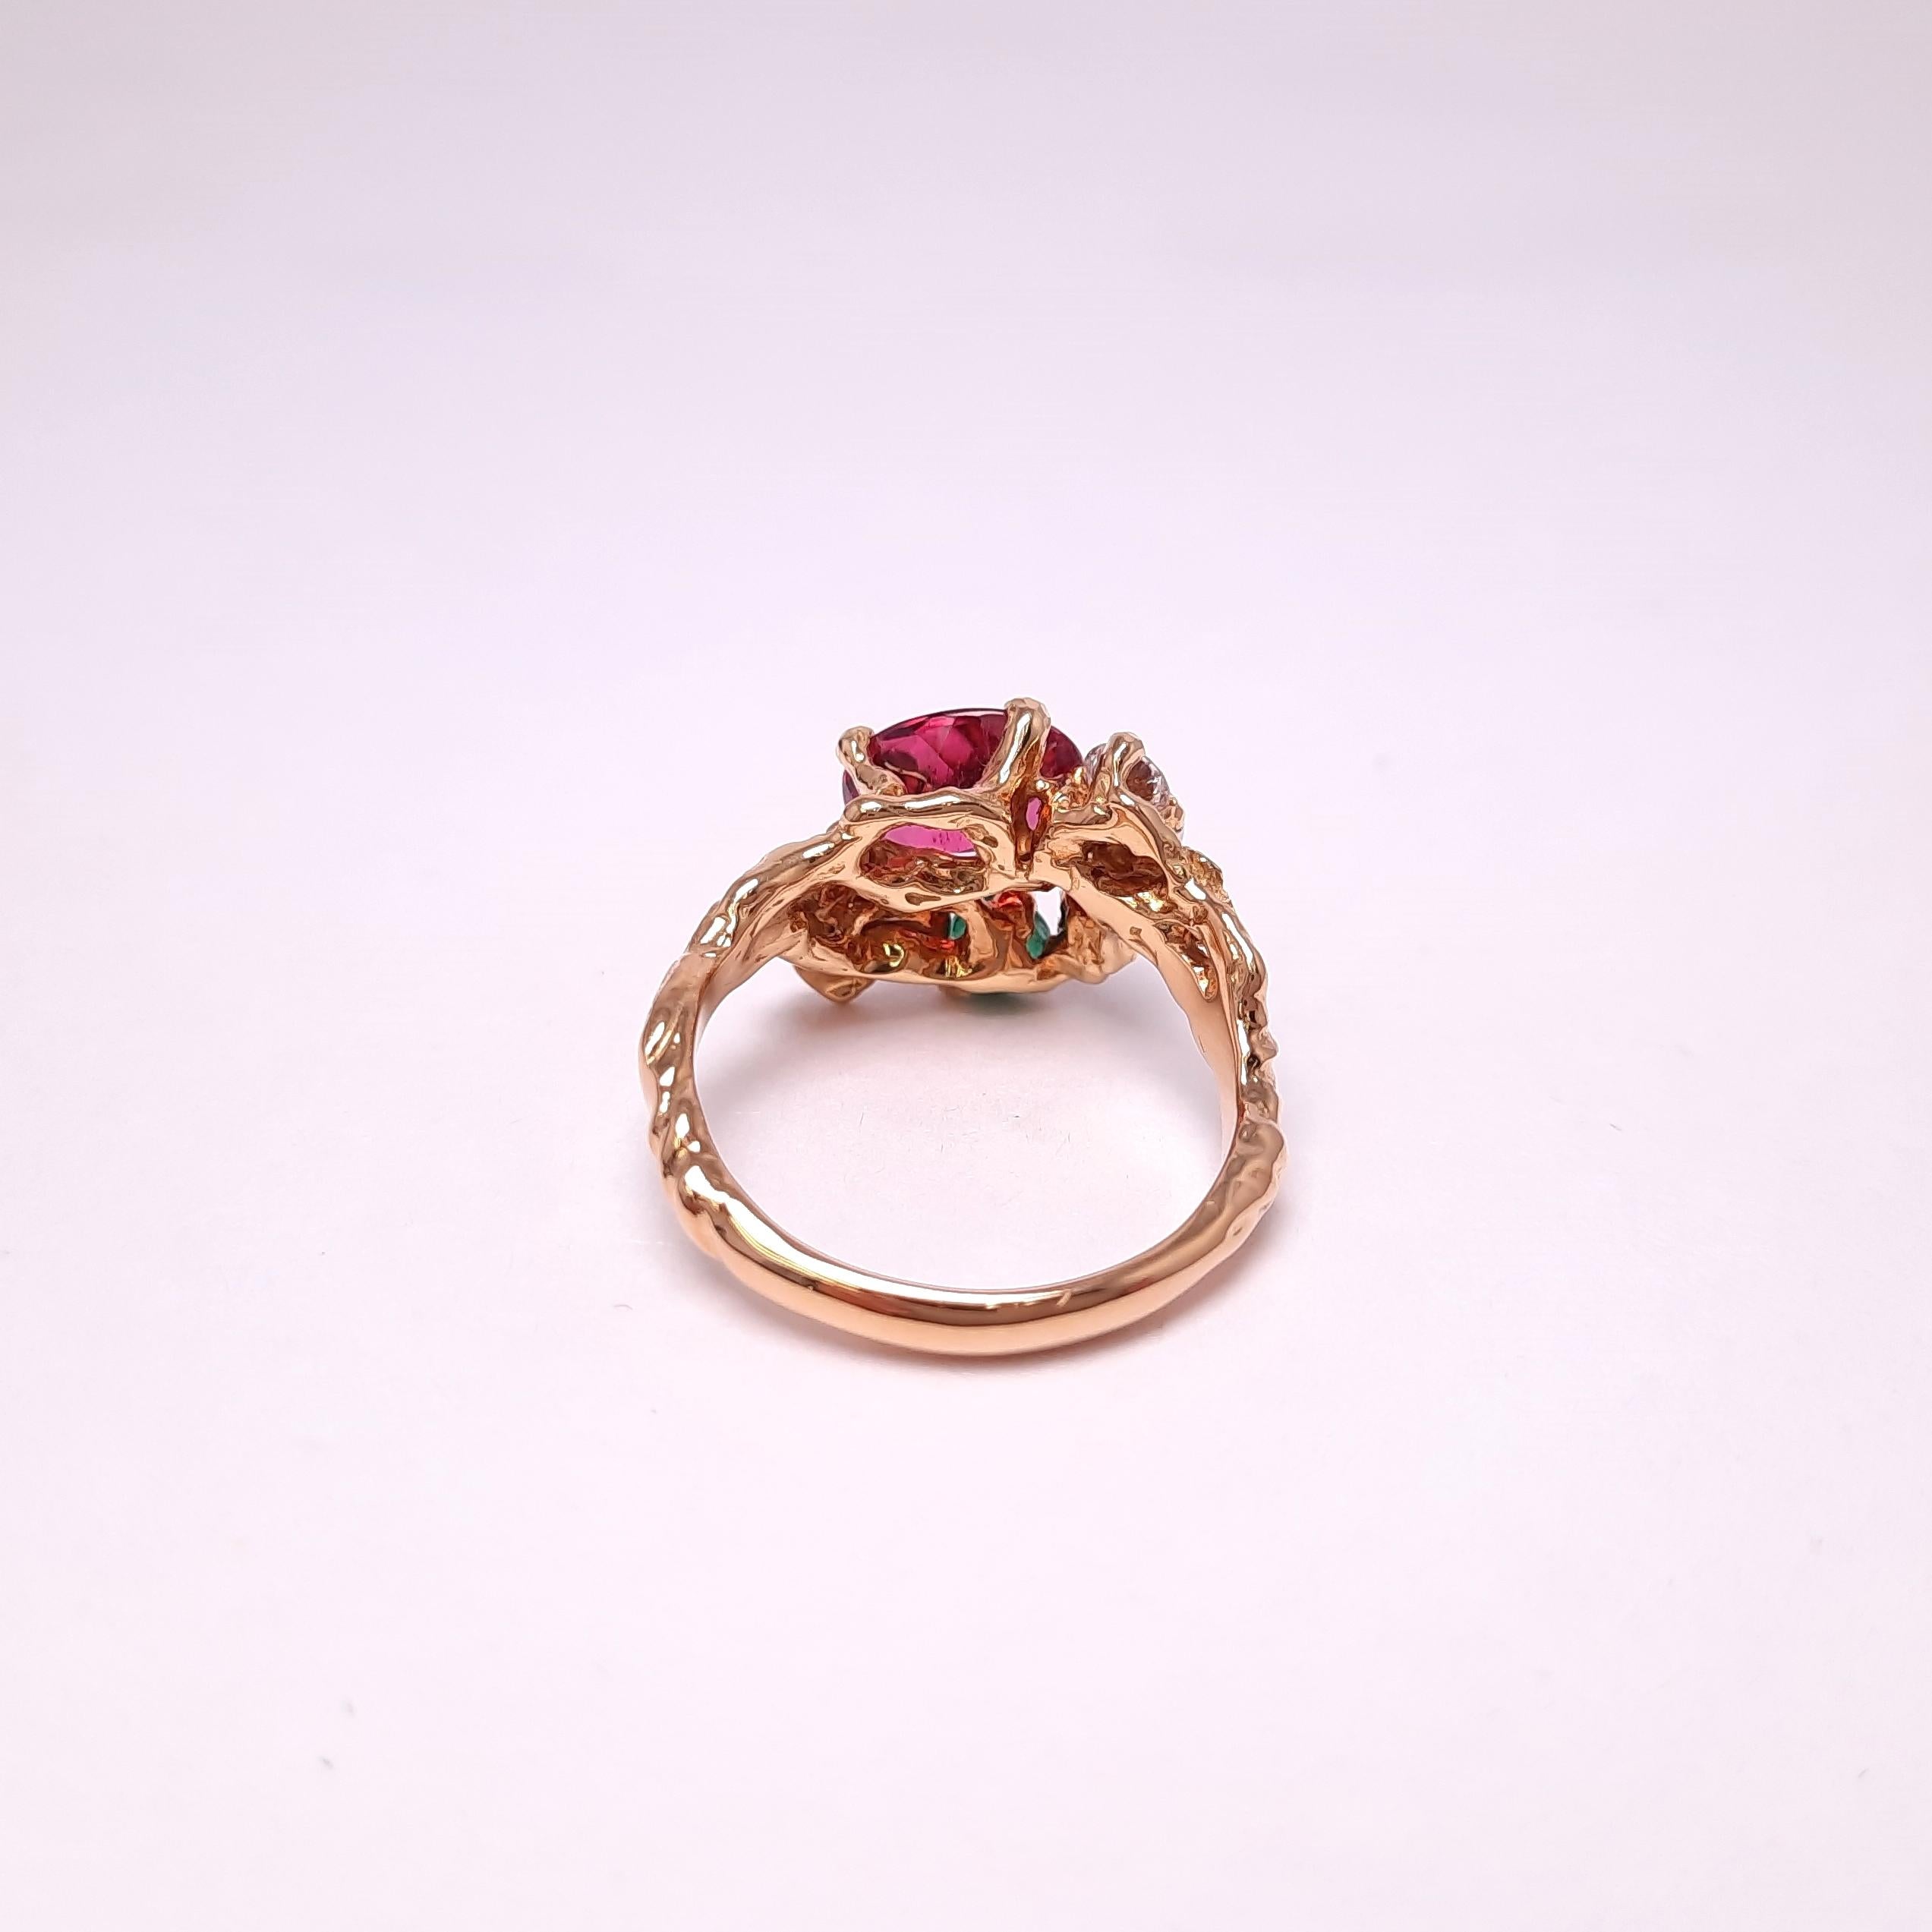 Oval Cut 18k Gold Emerald Pink Tourmaline Handmade Ring For Sale